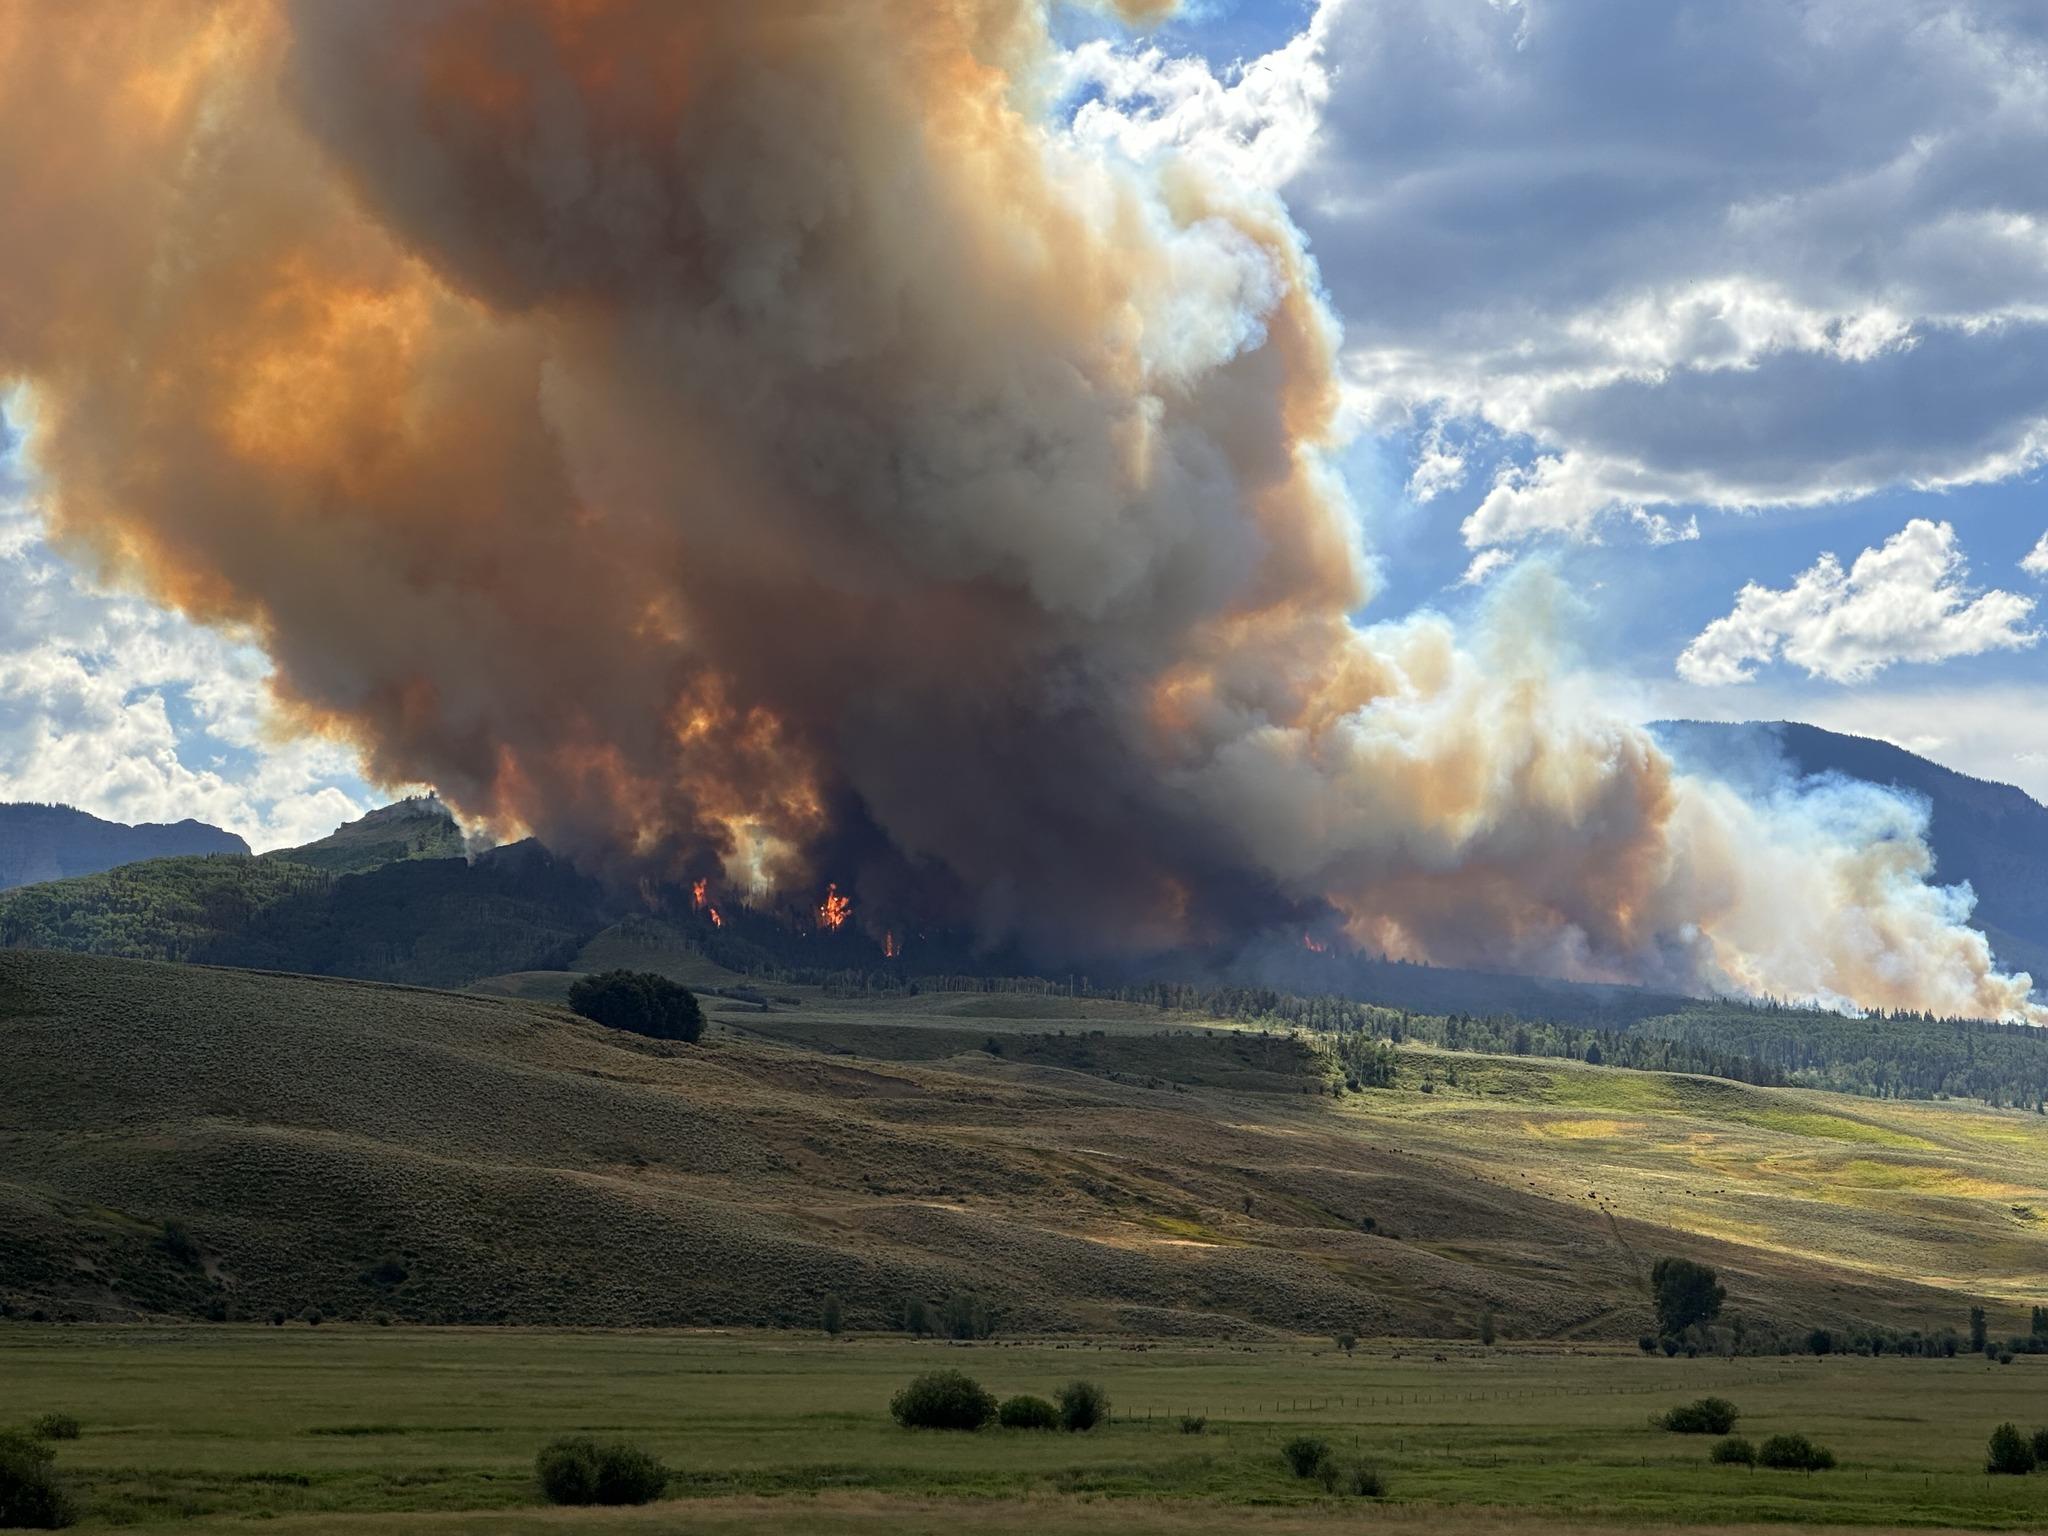 Large flames and heavy smoke in the near distance along a hillside. Green and brown hues on the hilly ground with a few small patches sagebrush in the forefront.